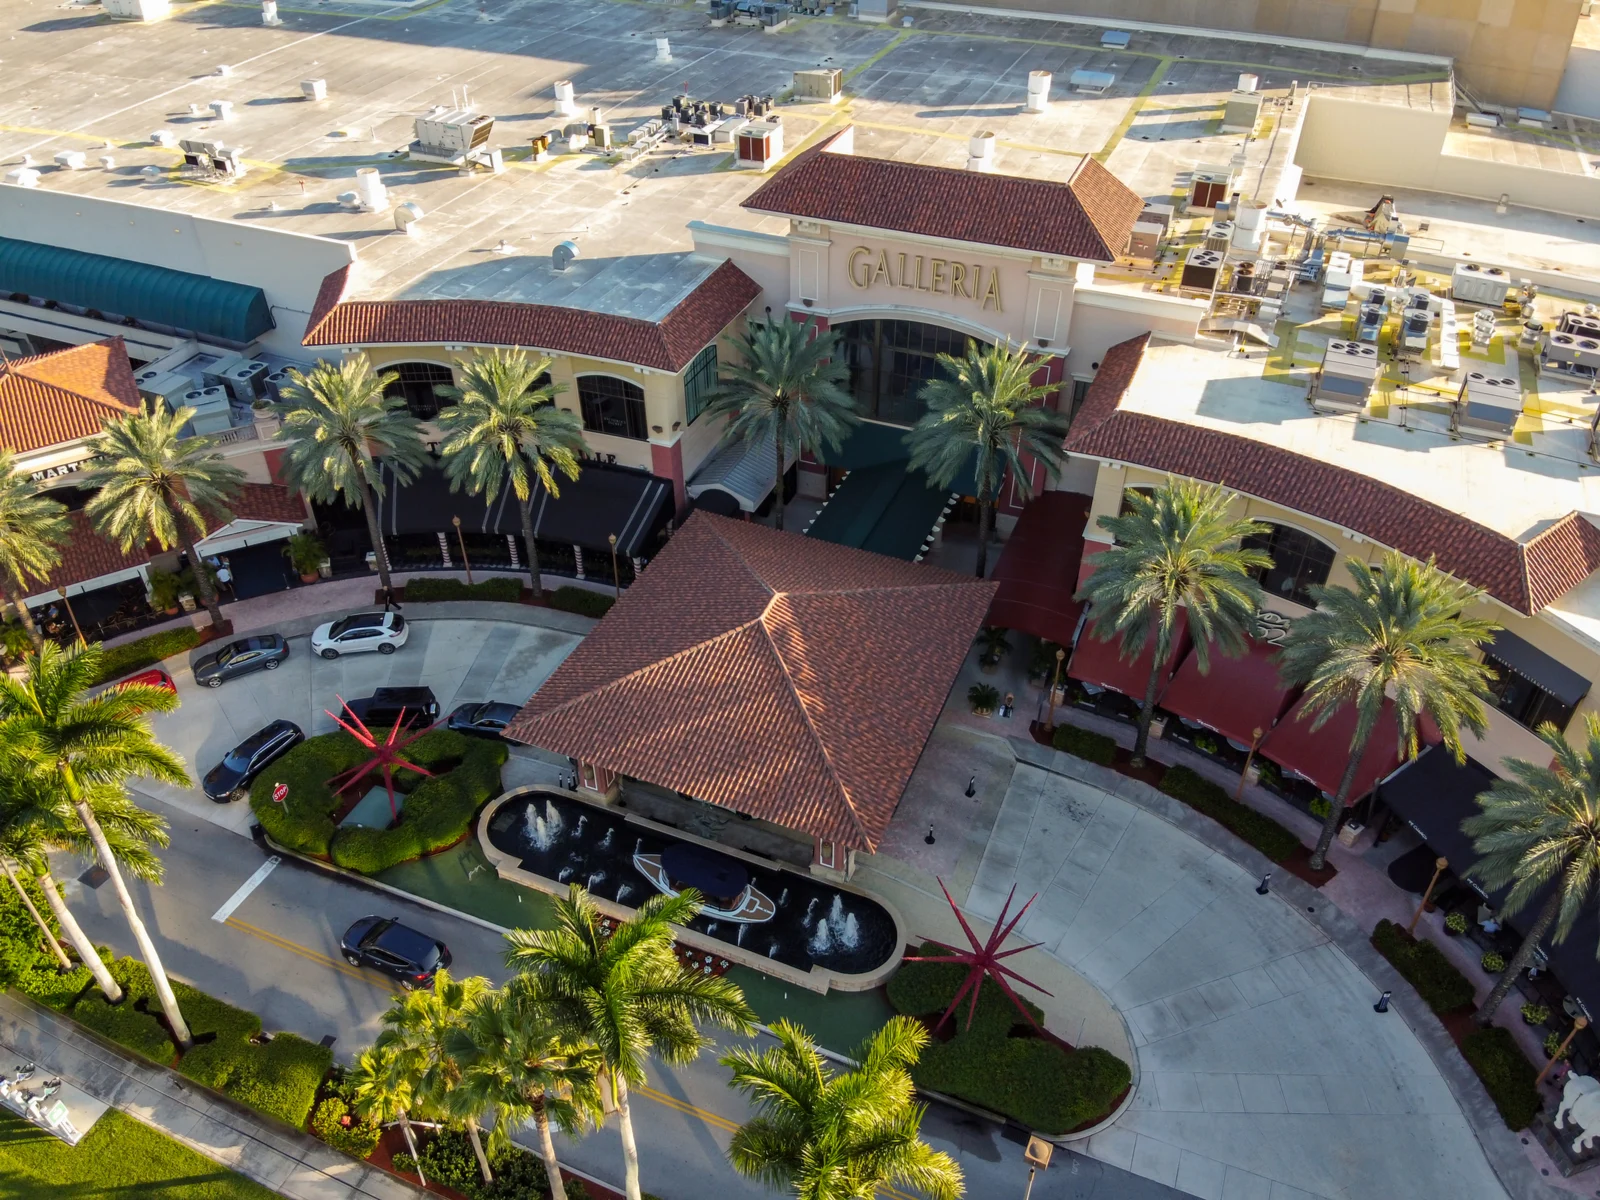 Aerial photo of the enormous The Galleria Mall as one of the best things to do in Fort Lauderdale, with few parked cars